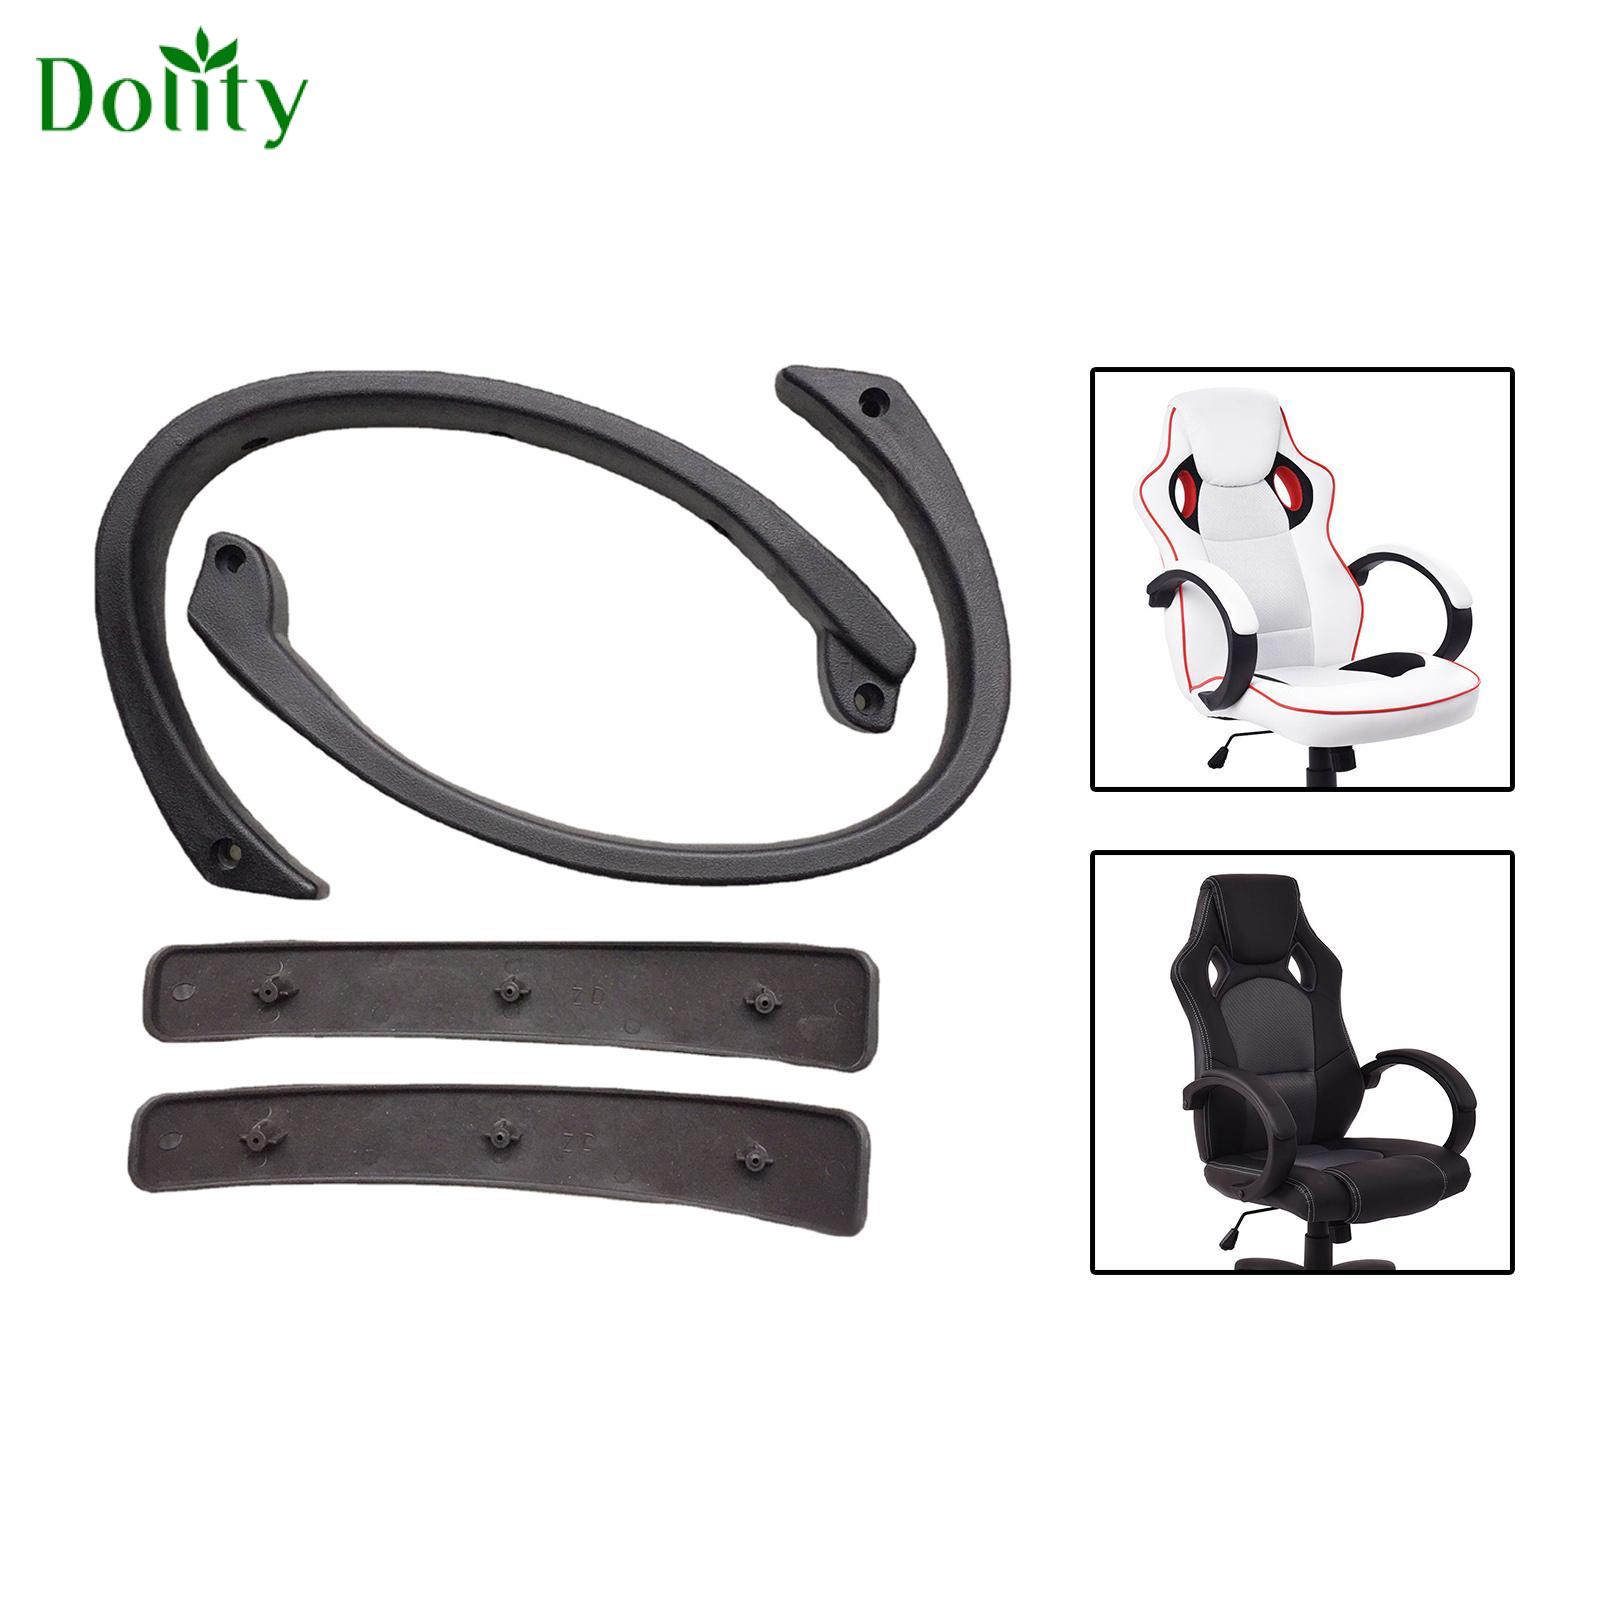 Dolity 2 Pieces Computer Chair Armrest Replacement Parts for High Back